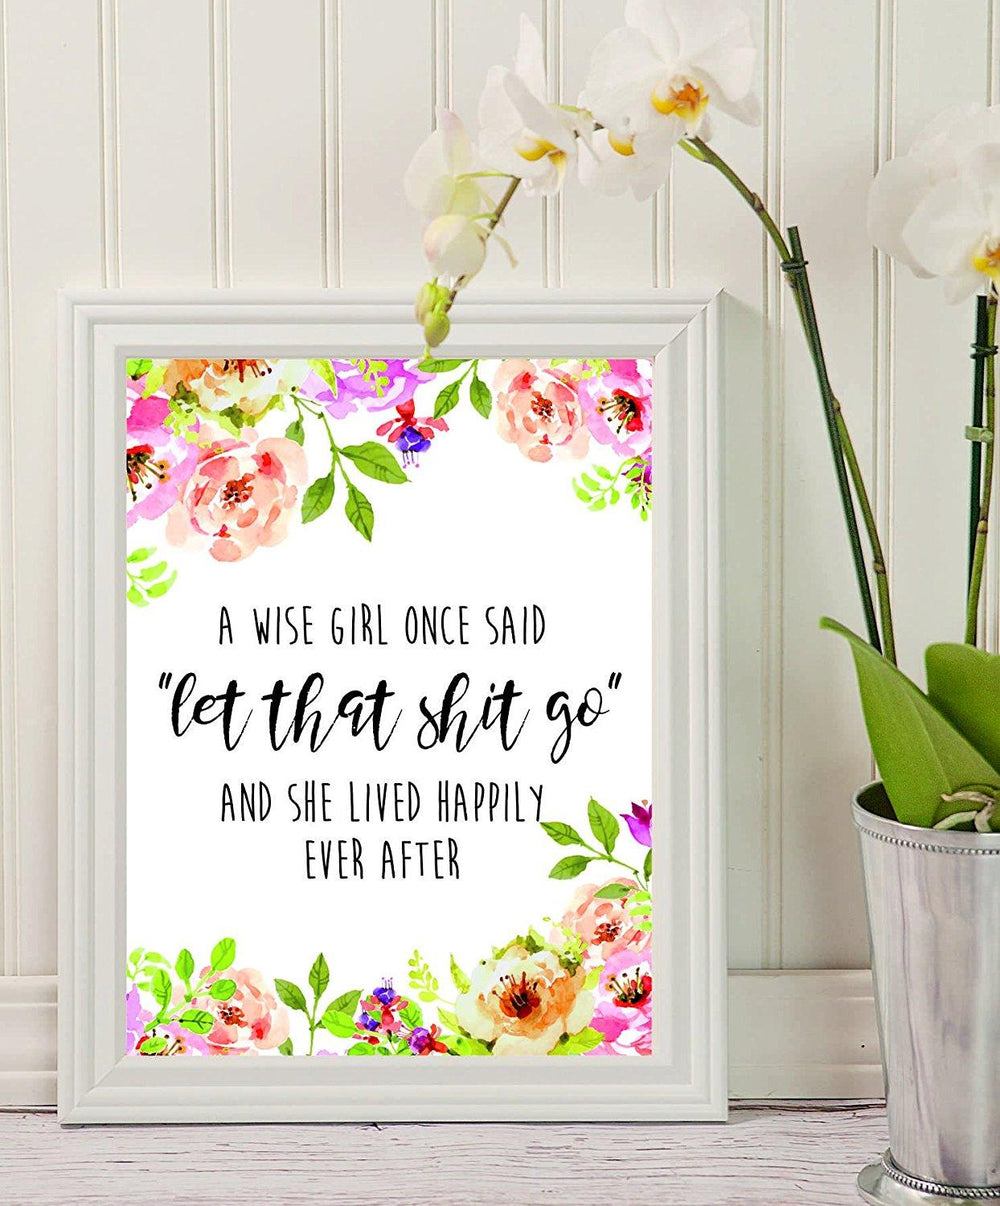 Wise Quote - A wise girl once said "let that shit go", - Inspirational Quote - Quote Print - Floral Print - Printable Décor - College Dorm Room Decorations-Wall Art-funny wall decor - BOSTON CREATIVE COMPANY